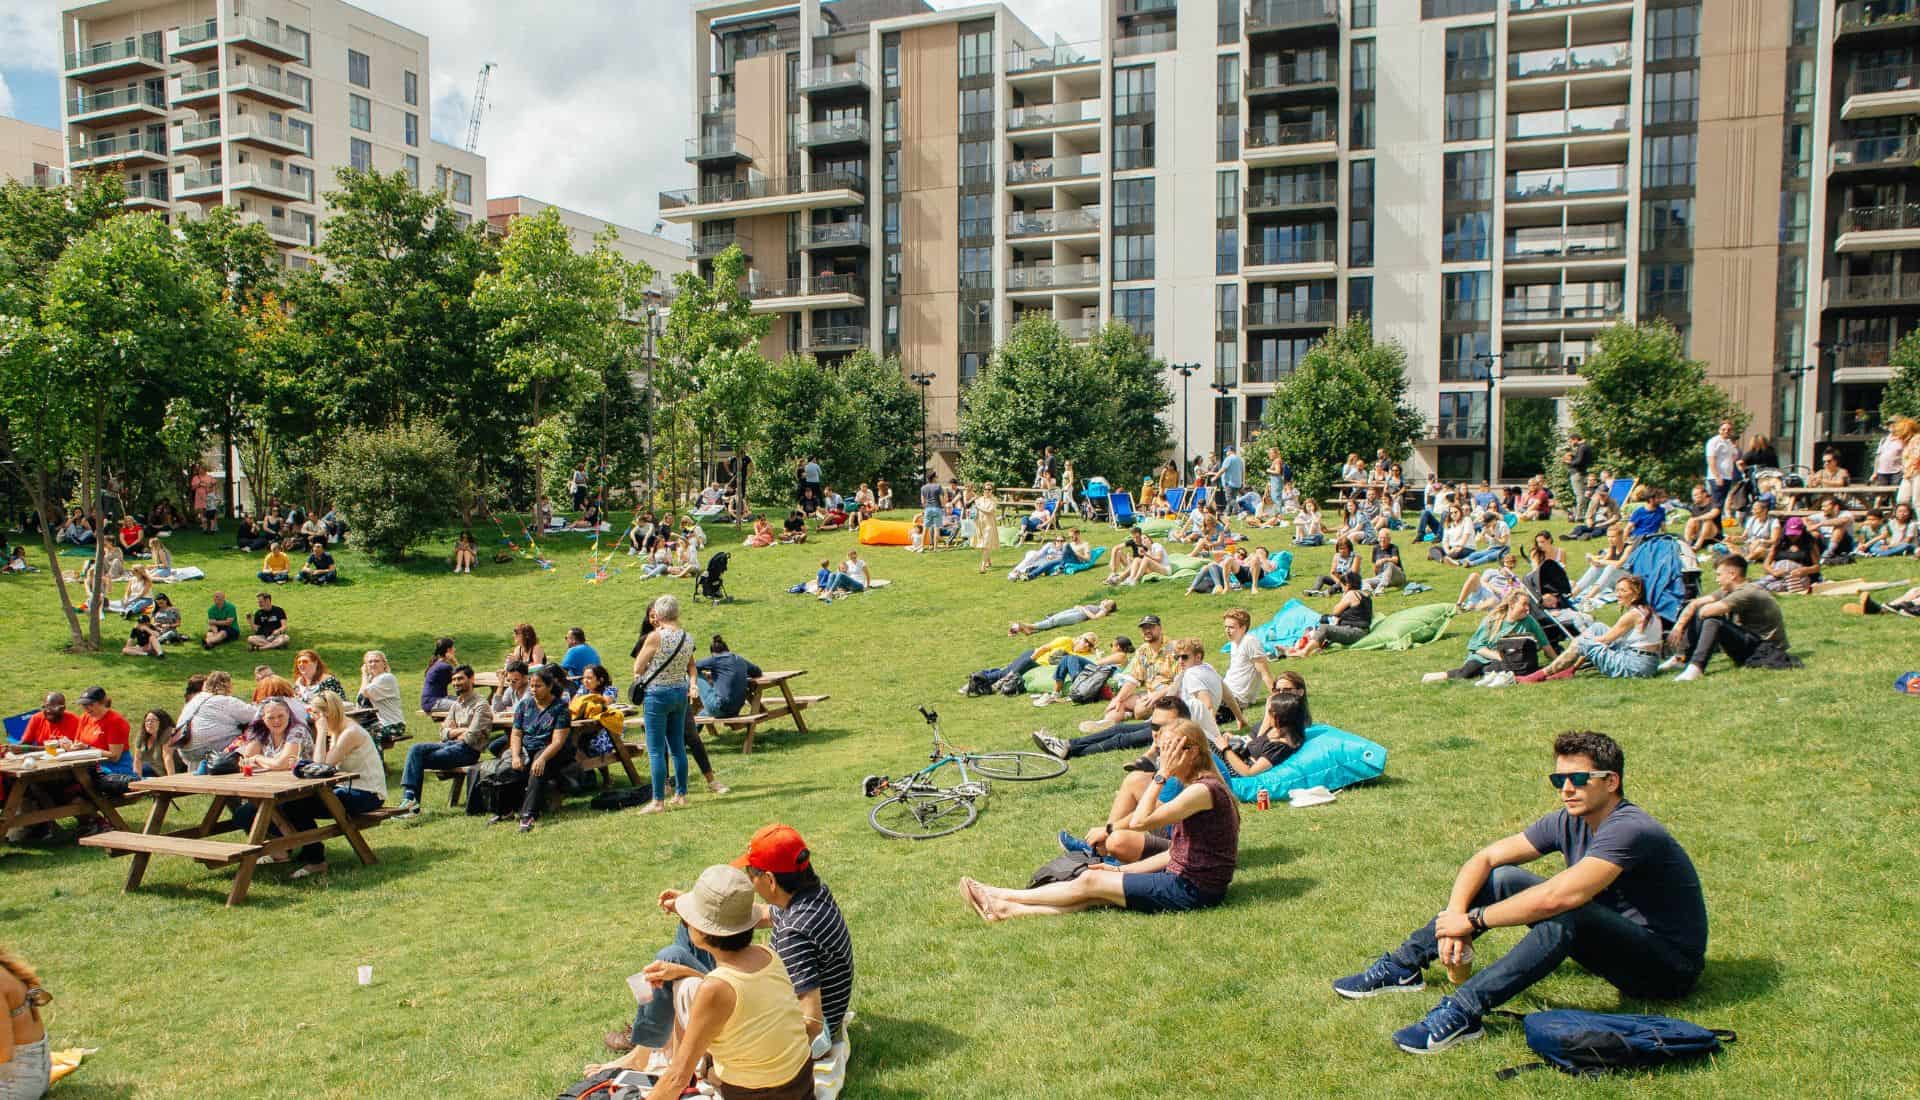 People on the grass of Victory Park at a summer community event with East Village buildings in the background